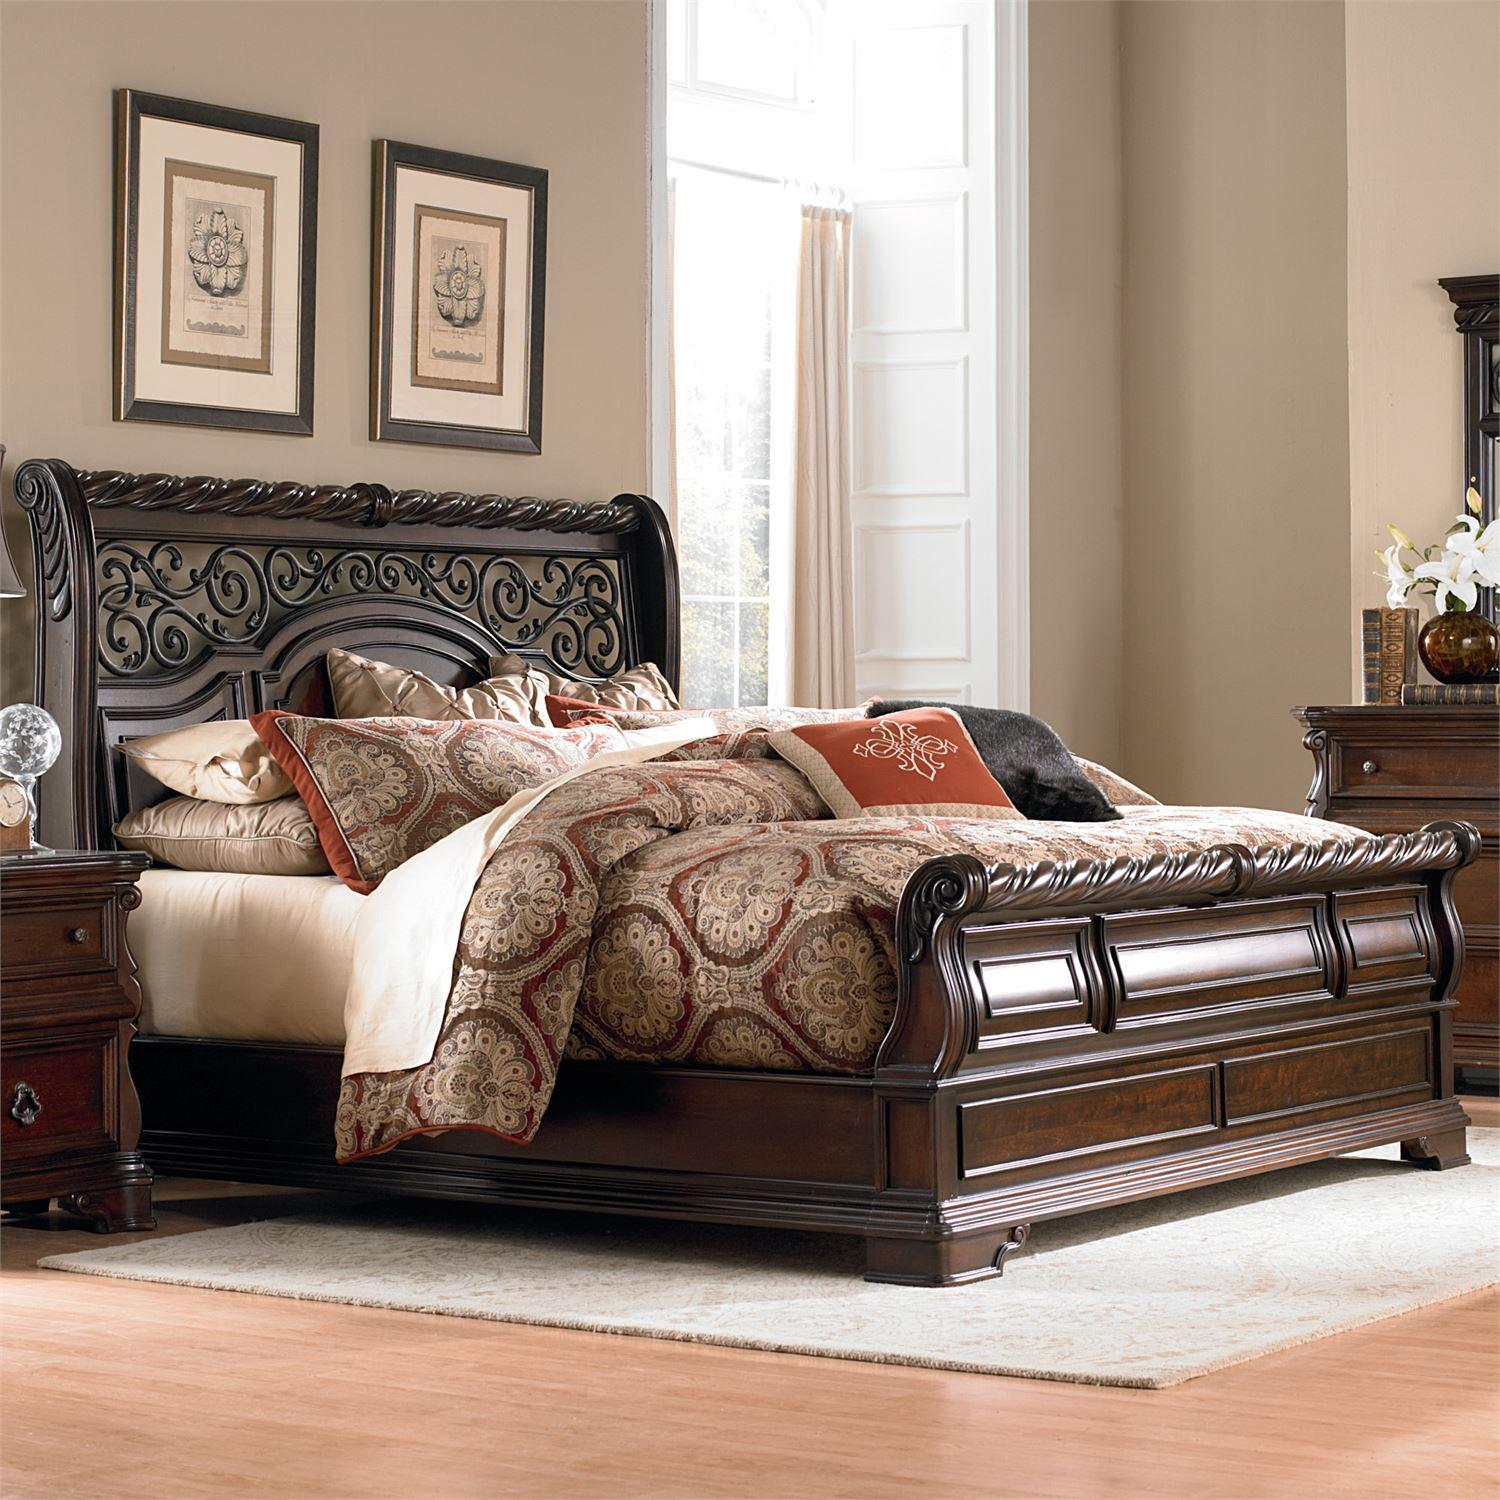 European Traditional Sleigh Bed Arbor Place  575-BR-QSL 575-BR-QSL in Brown 